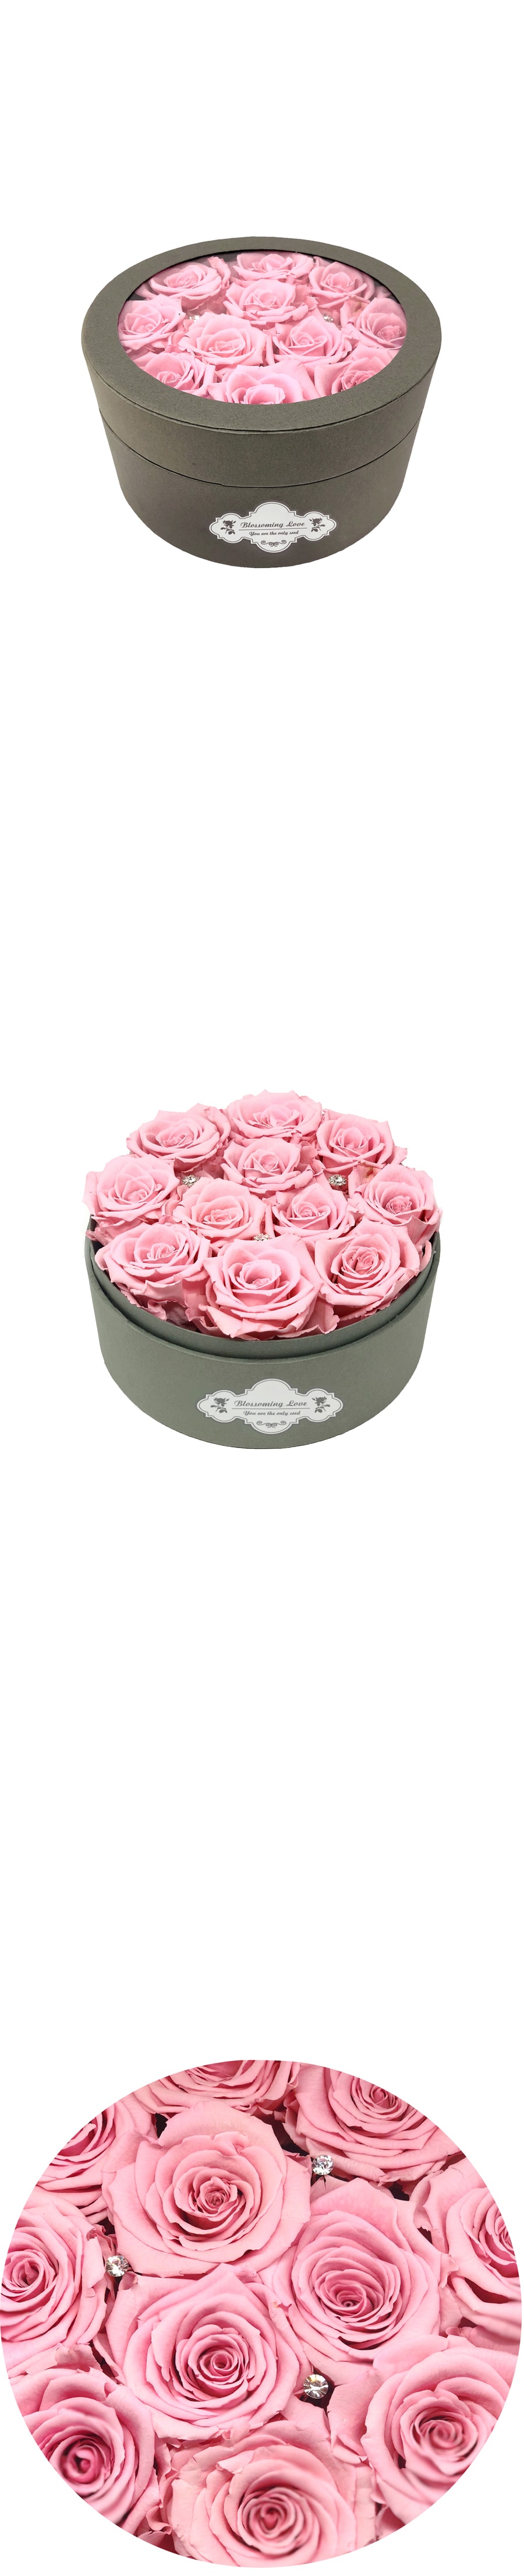 See-through small round box- Pink roses